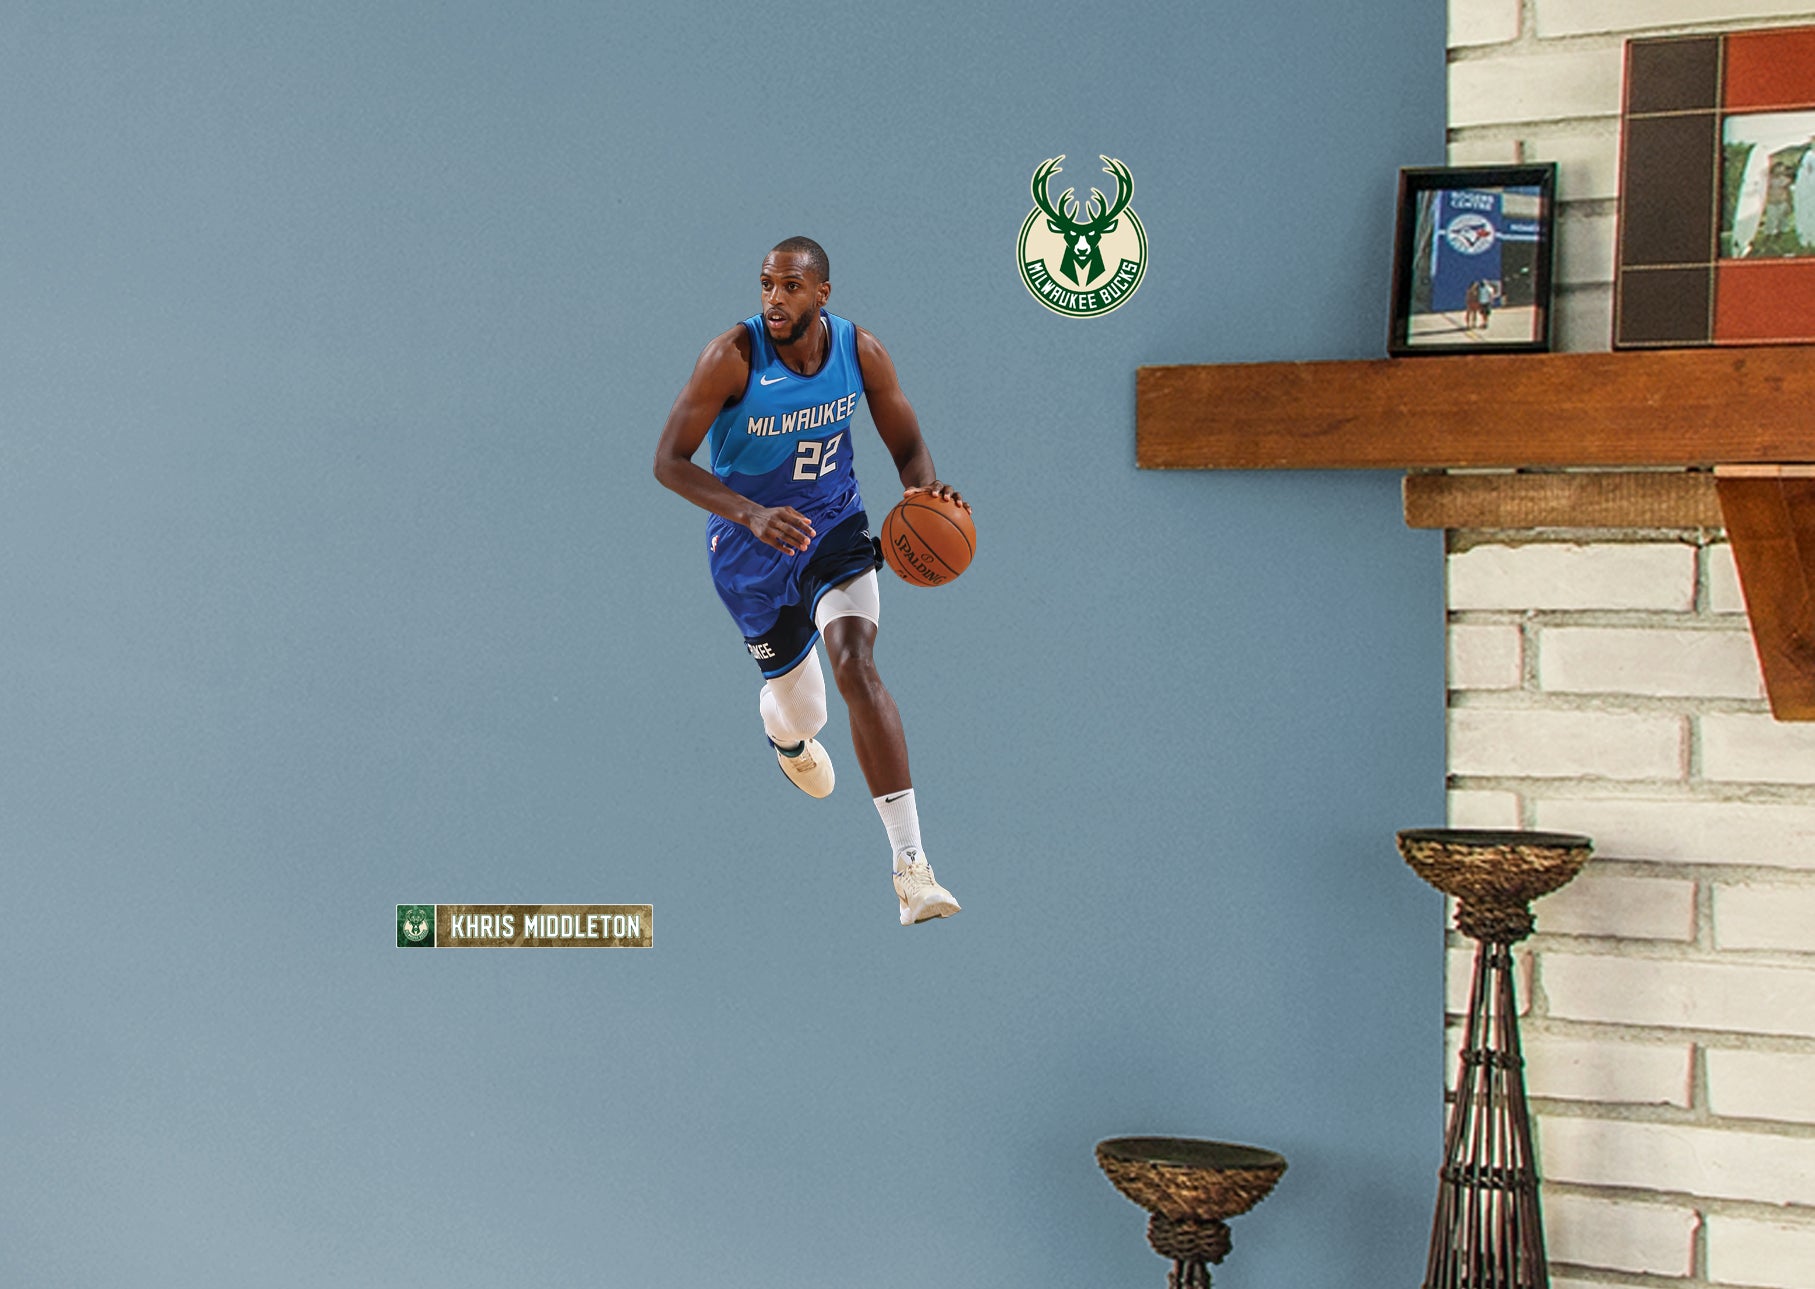 Khris Middleton 2021 Blue Jersey for Milwaukee Bucks - Officially Licensed NBA Removable Wall Decal Large by Fathead | Vinyl